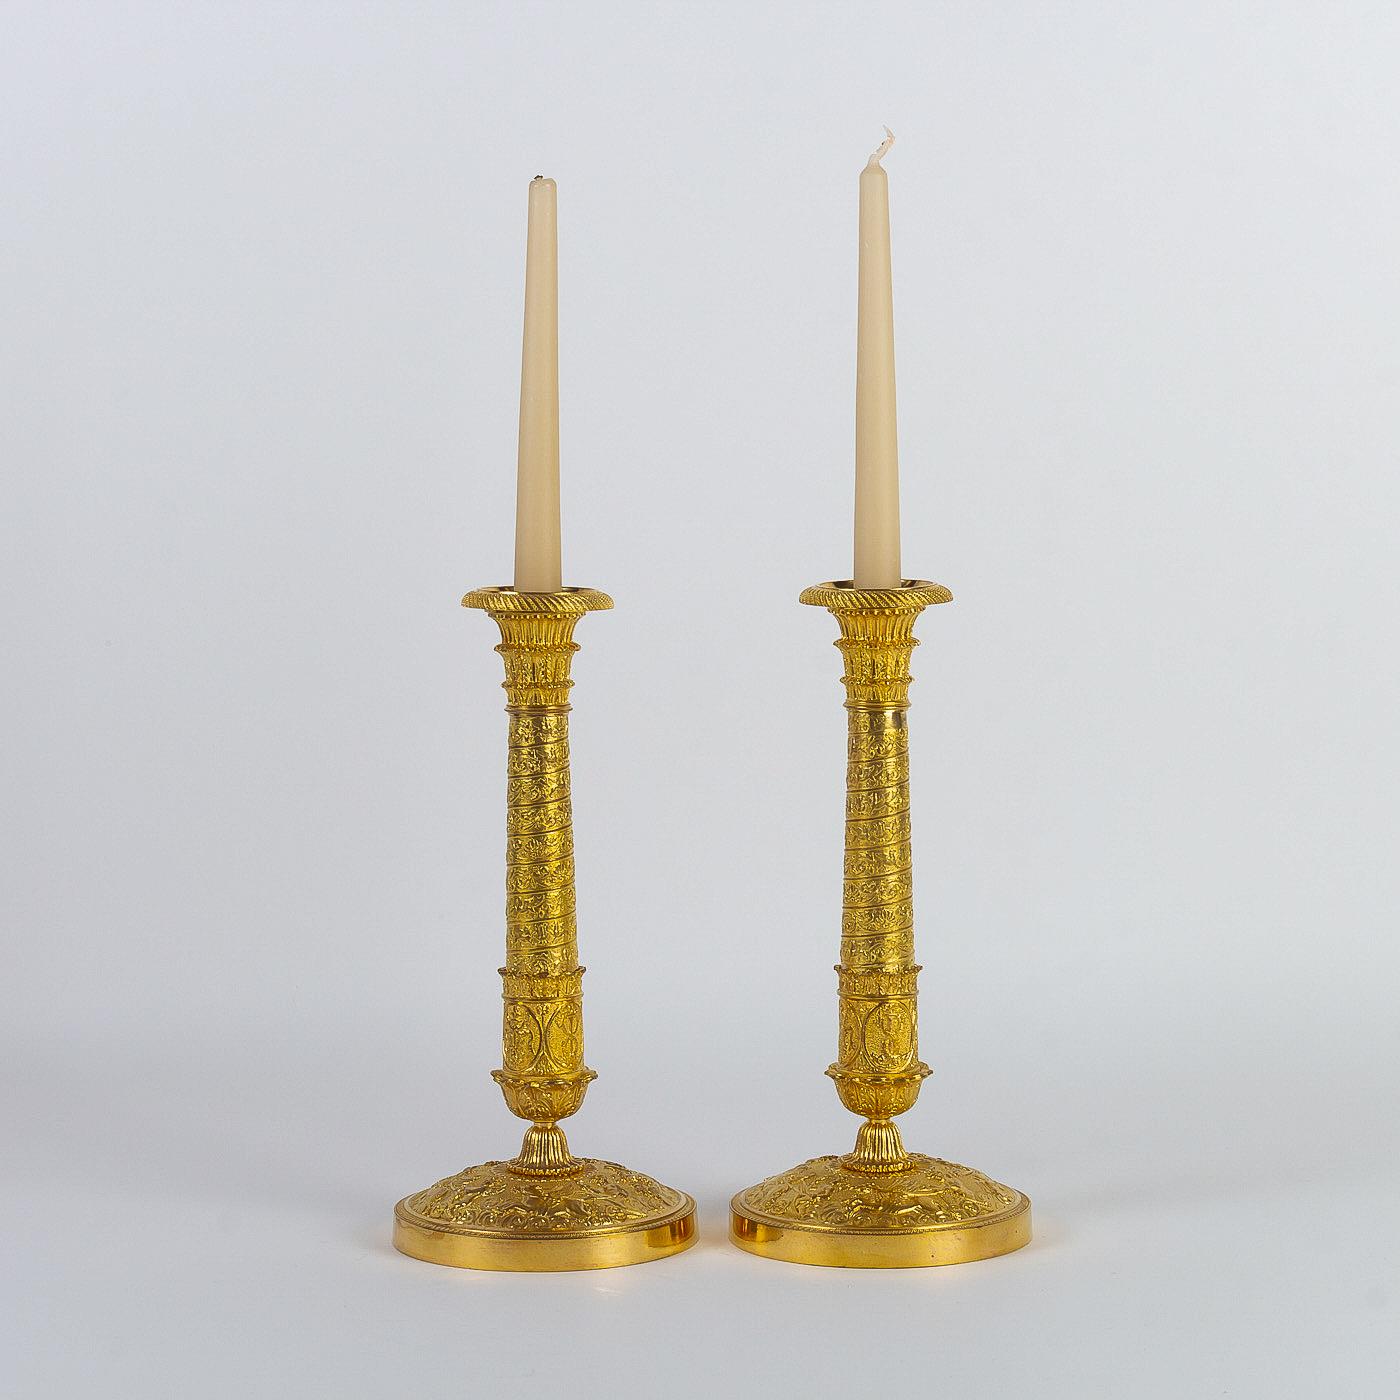 French Empire period pair of gilt-bronze with twisted-barrels candlesticks, circa 1810.

A decorative and rare pair of candlesticks with twisted gilt-bronze barrels finely chiseled on the terrace of Amours winged to the chariots pulled by horses